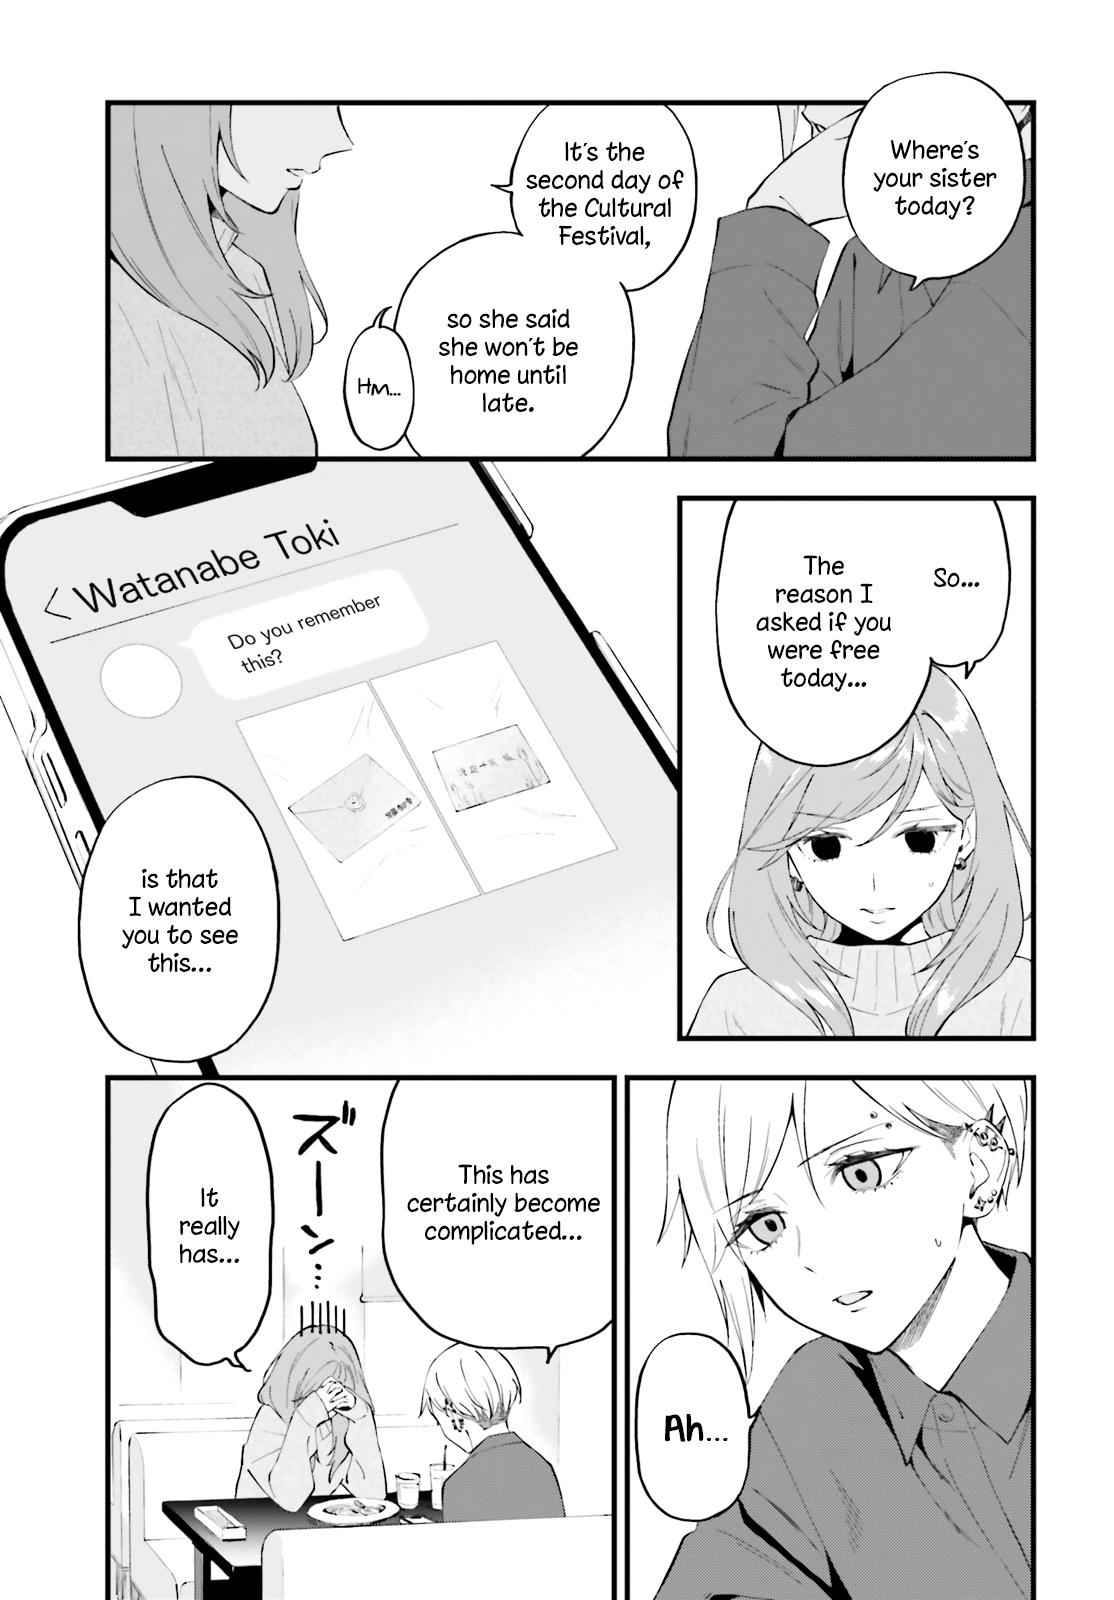 Keiyaku Shimai Vol.3 Chapter 13: Sisters Who Have Different Relationships With The People Around Them - Picture 3